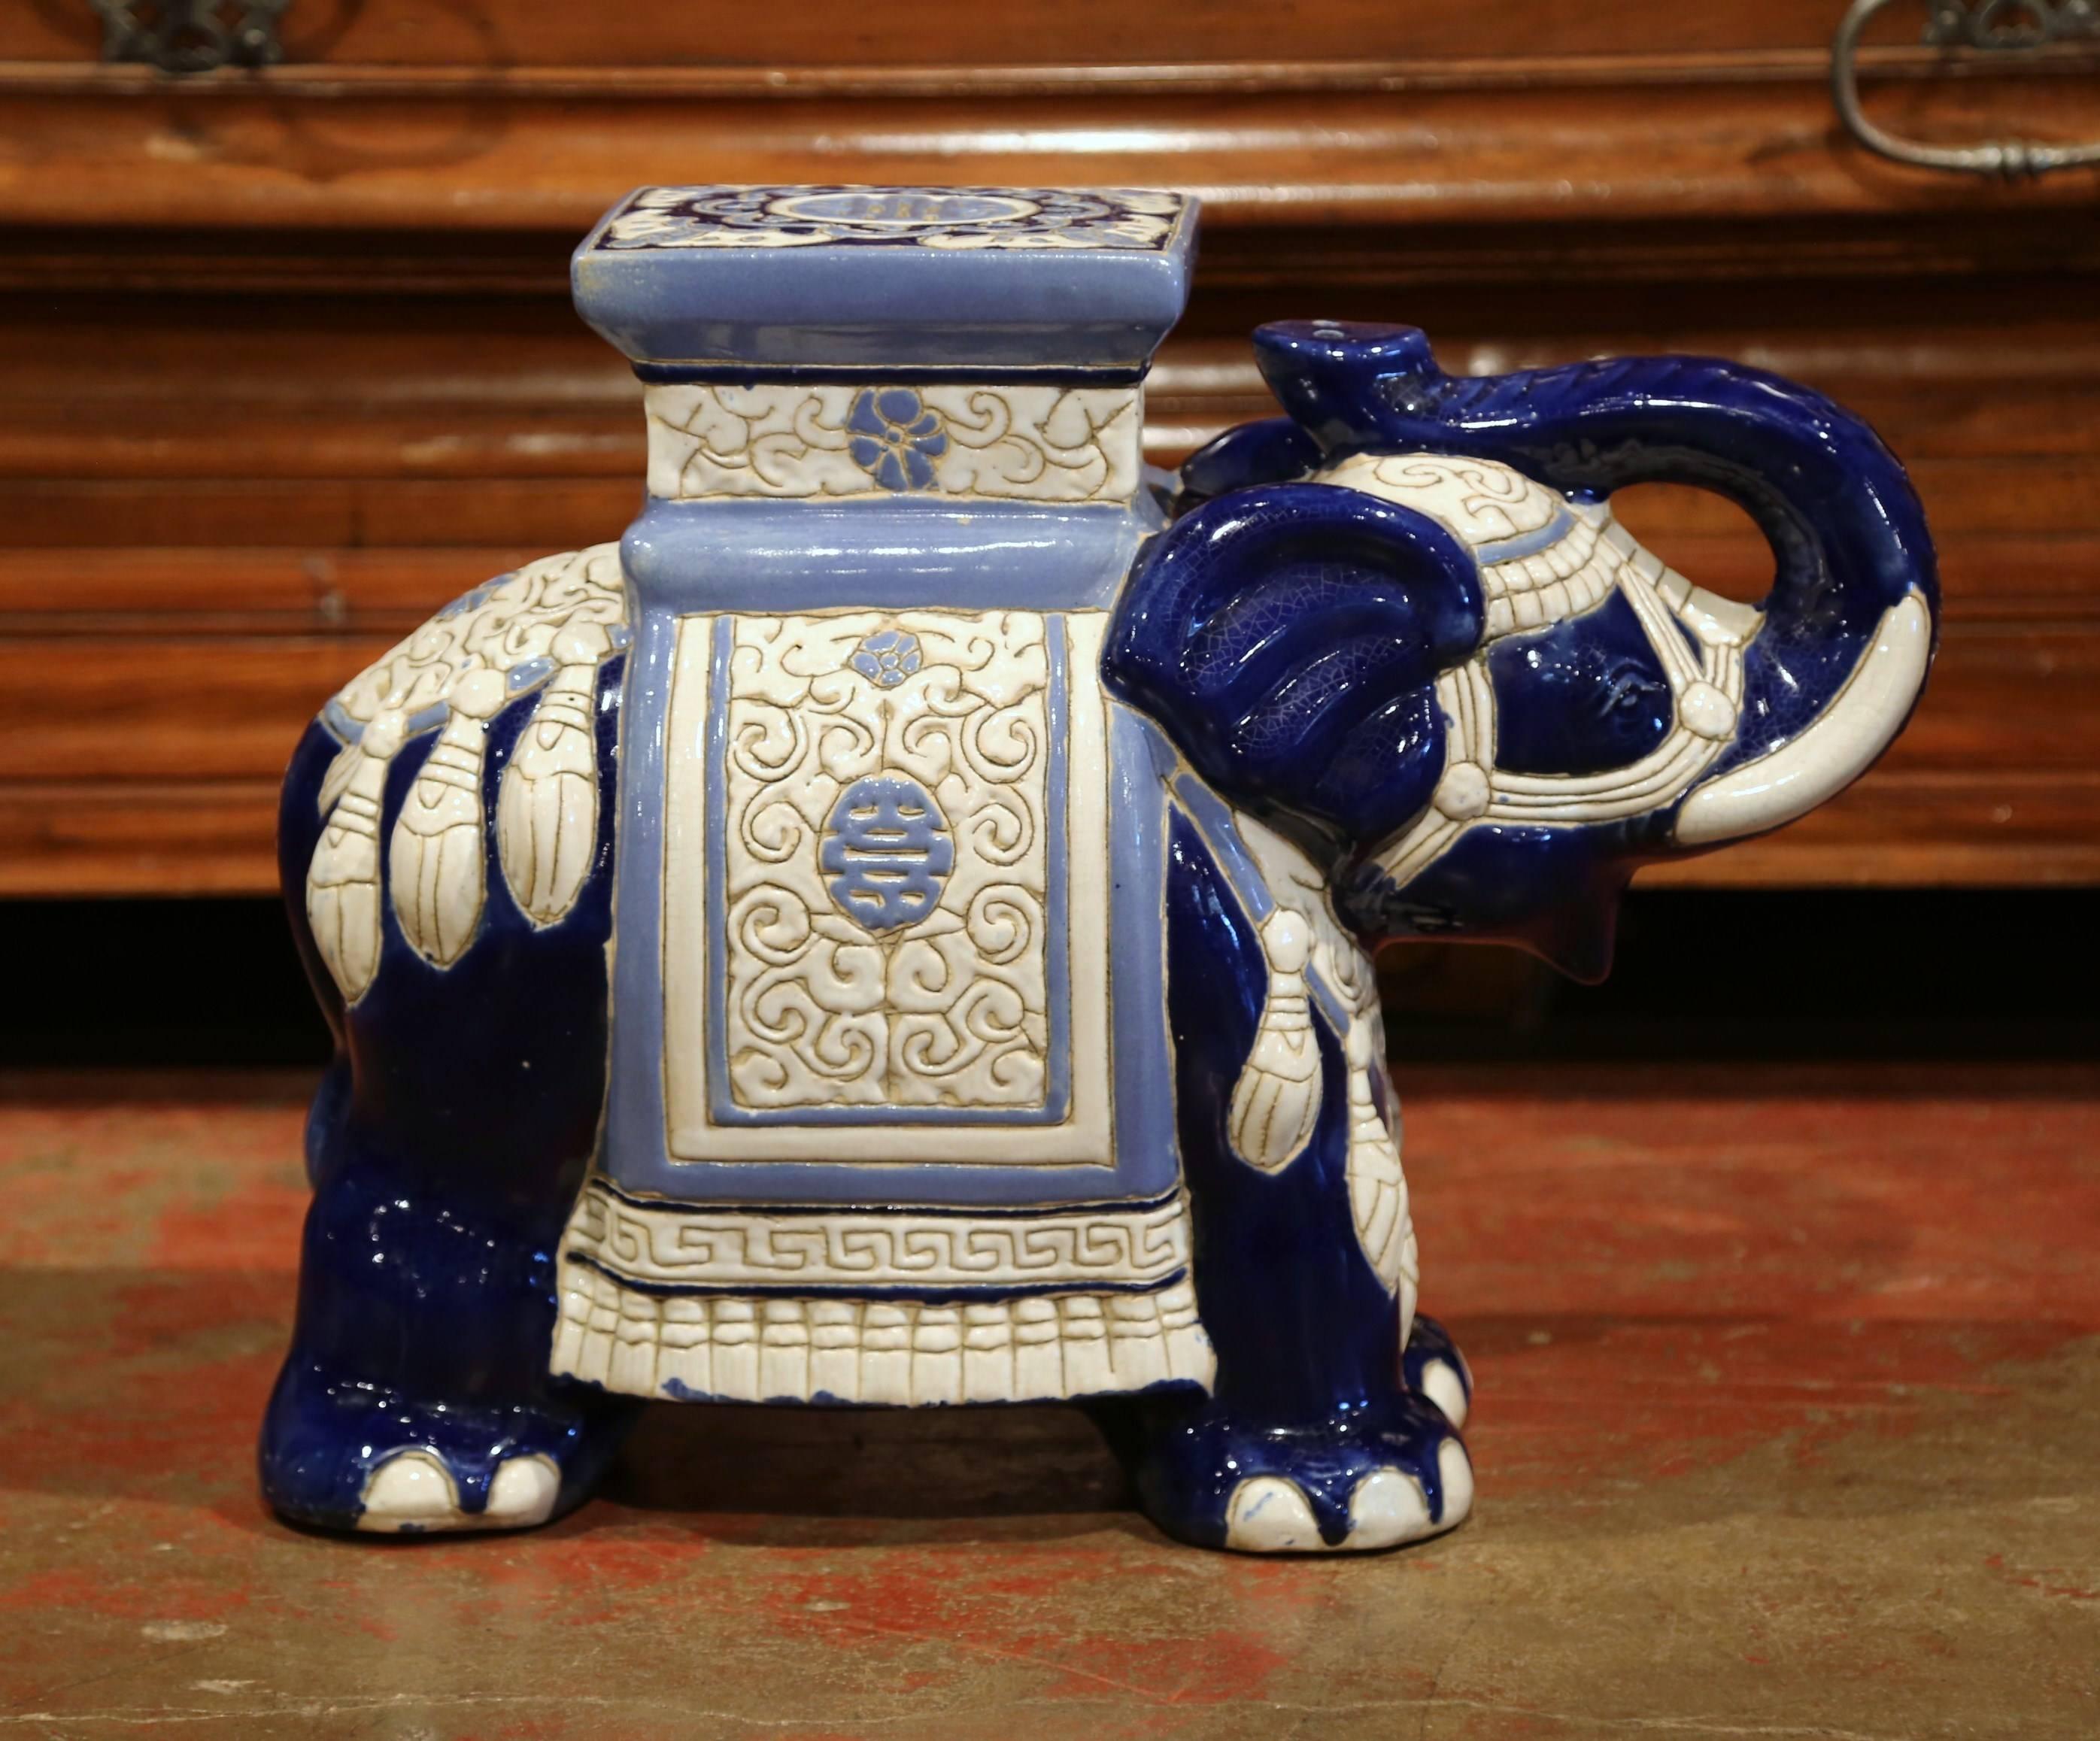 This interesting, porcelain garden seat was sculpted in France, circa 1950. The piece is in the shape of an elephant raising his trunk, which is heavily decorated in oriental finery. The mammal has a square seat at the top, and is hand-painted in a